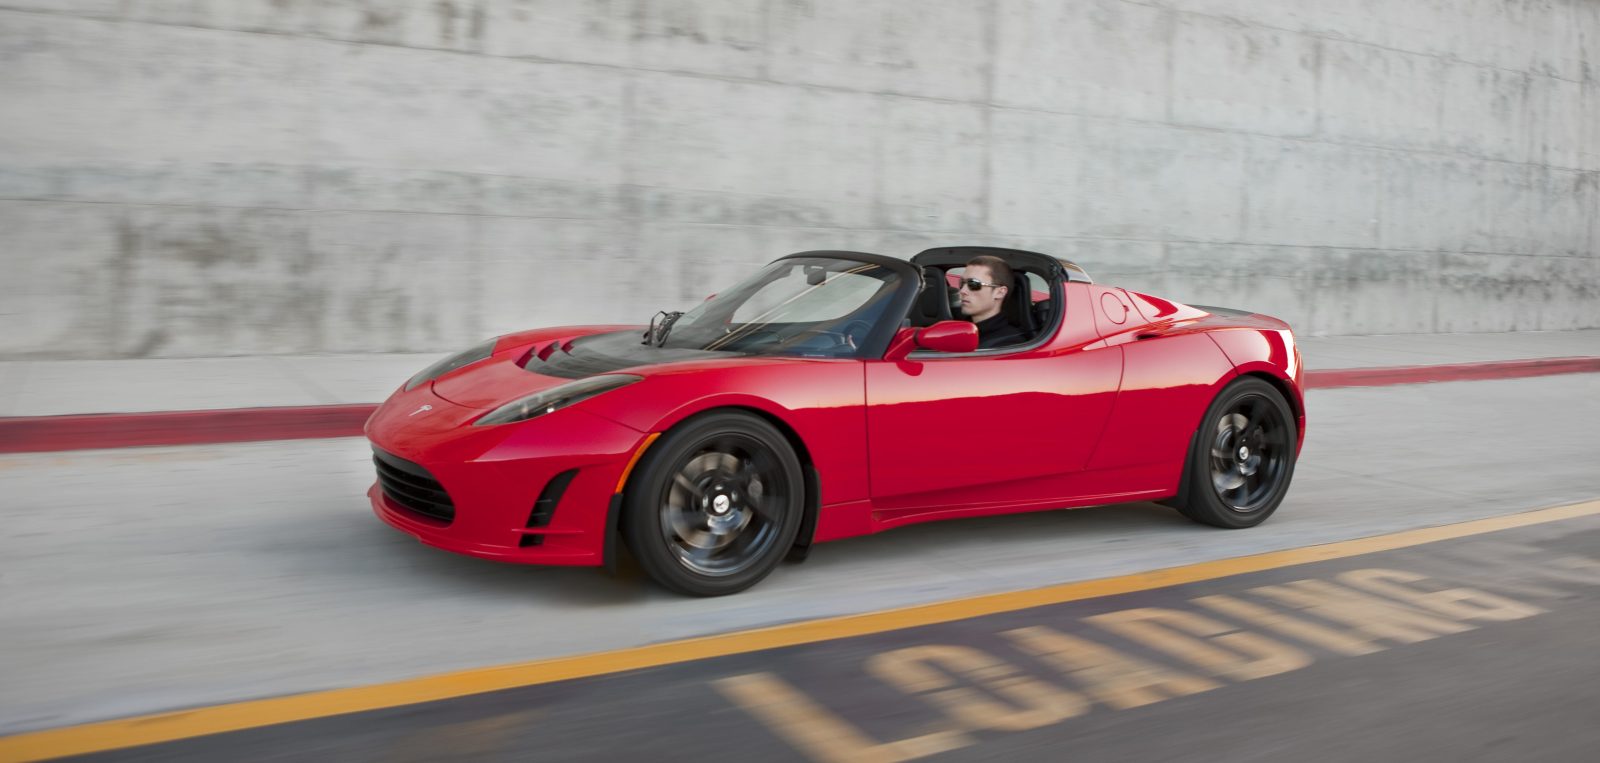 Tesla launched the Roadster exactly 10 years ago and came out of stealth  mode - Here's a trip down memory lane [Gallery] | Electrek